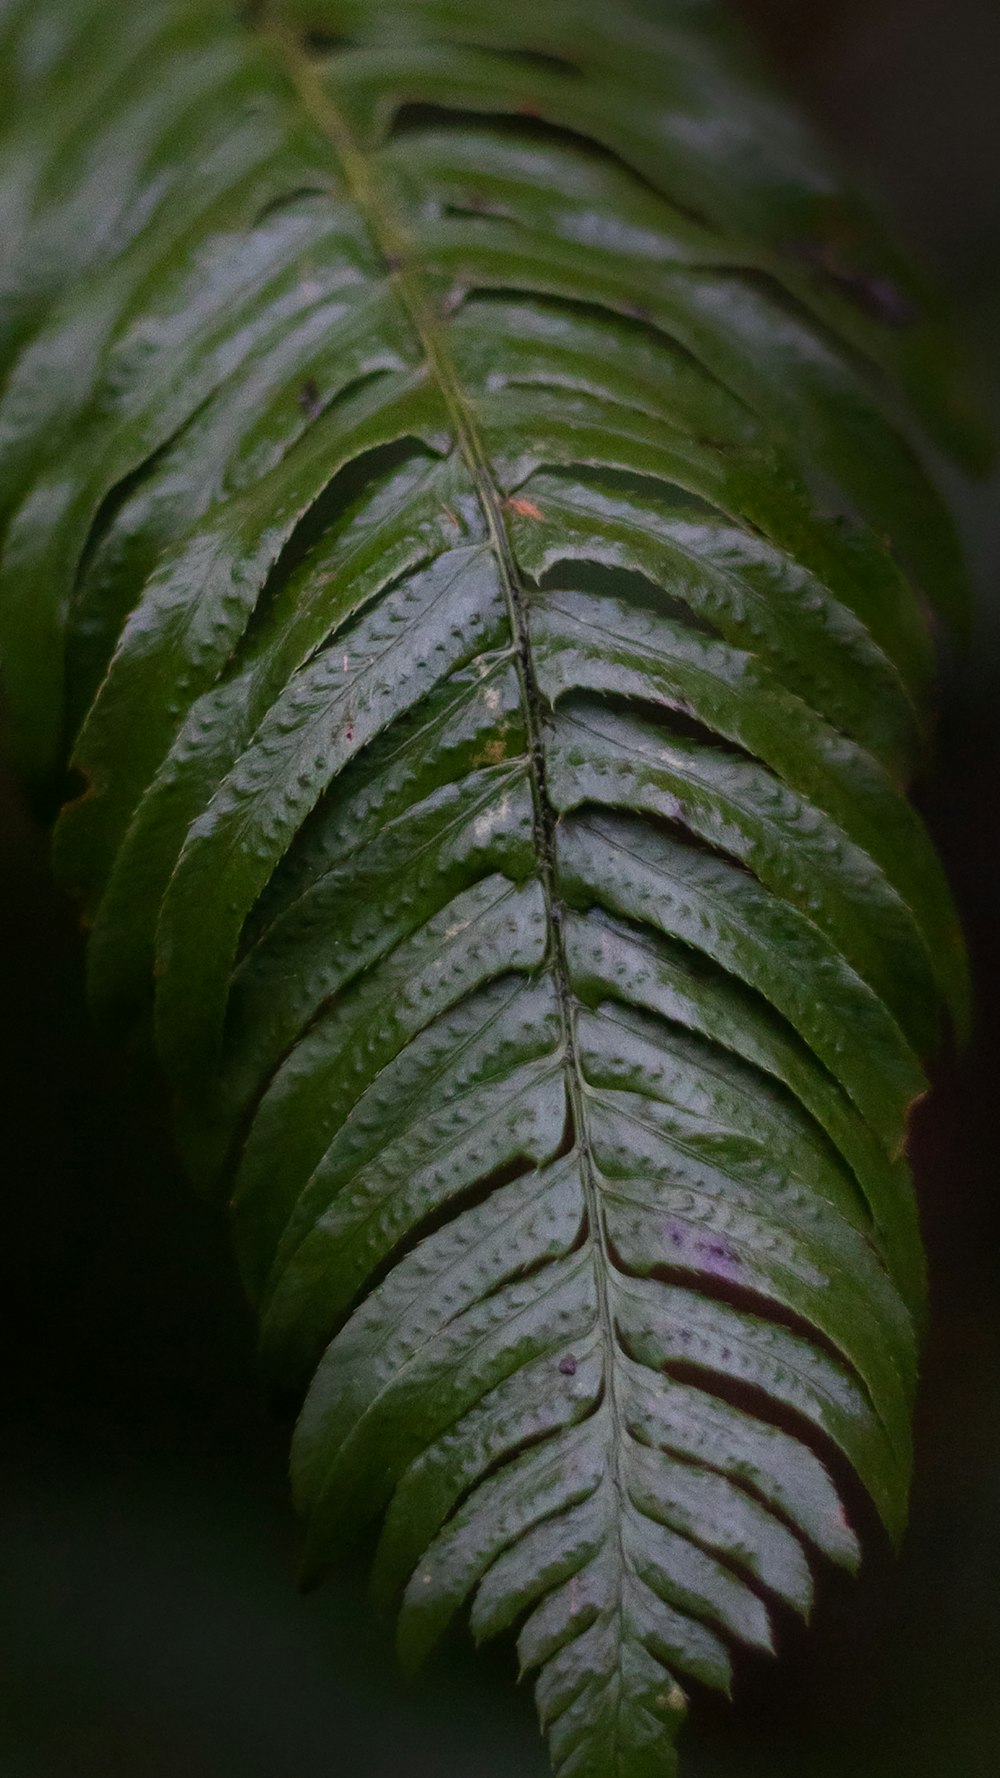 a close up of a green leaf with drops of water on it